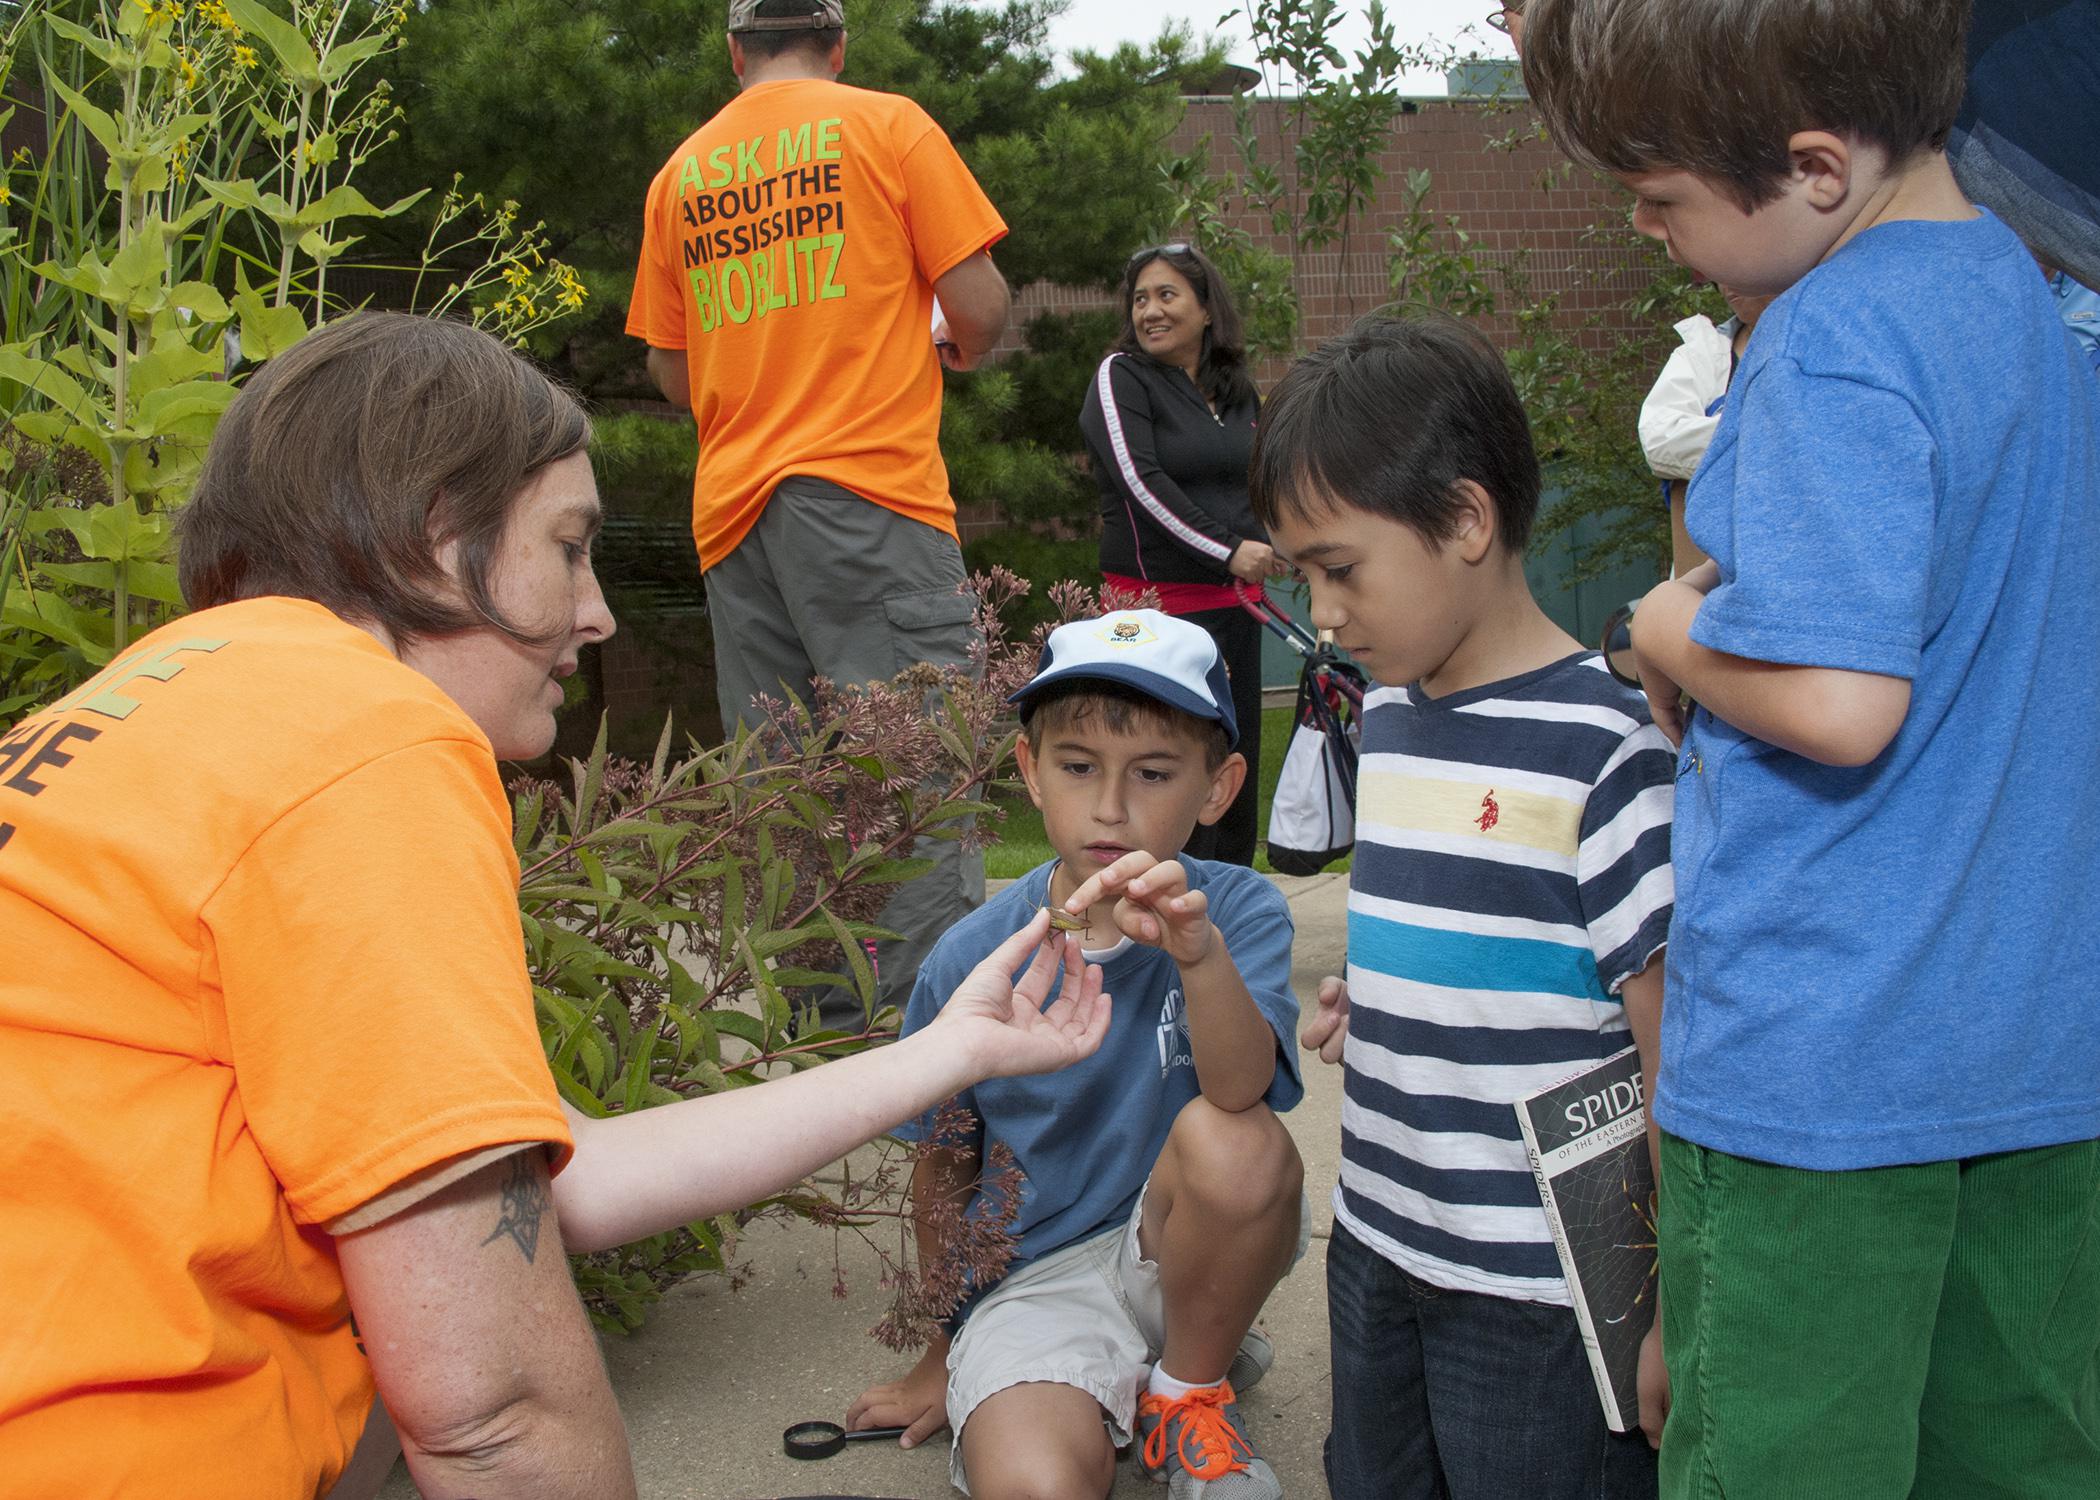 Jennifer Seltzer, a research associate with the Mississippi Entomological Museum at Mississippi State University, talks to Jameson Clancy, sitting, Thomas Taylor and Simon Smith about a grasshopper they found during the BioBlitz Sept. 13, 2014, at the Mississippi Museum of Natural Science. The 13-hour event helped educate the public about local ecosystems. (Photo by MSU Ag Communications/Kat Lawrence)